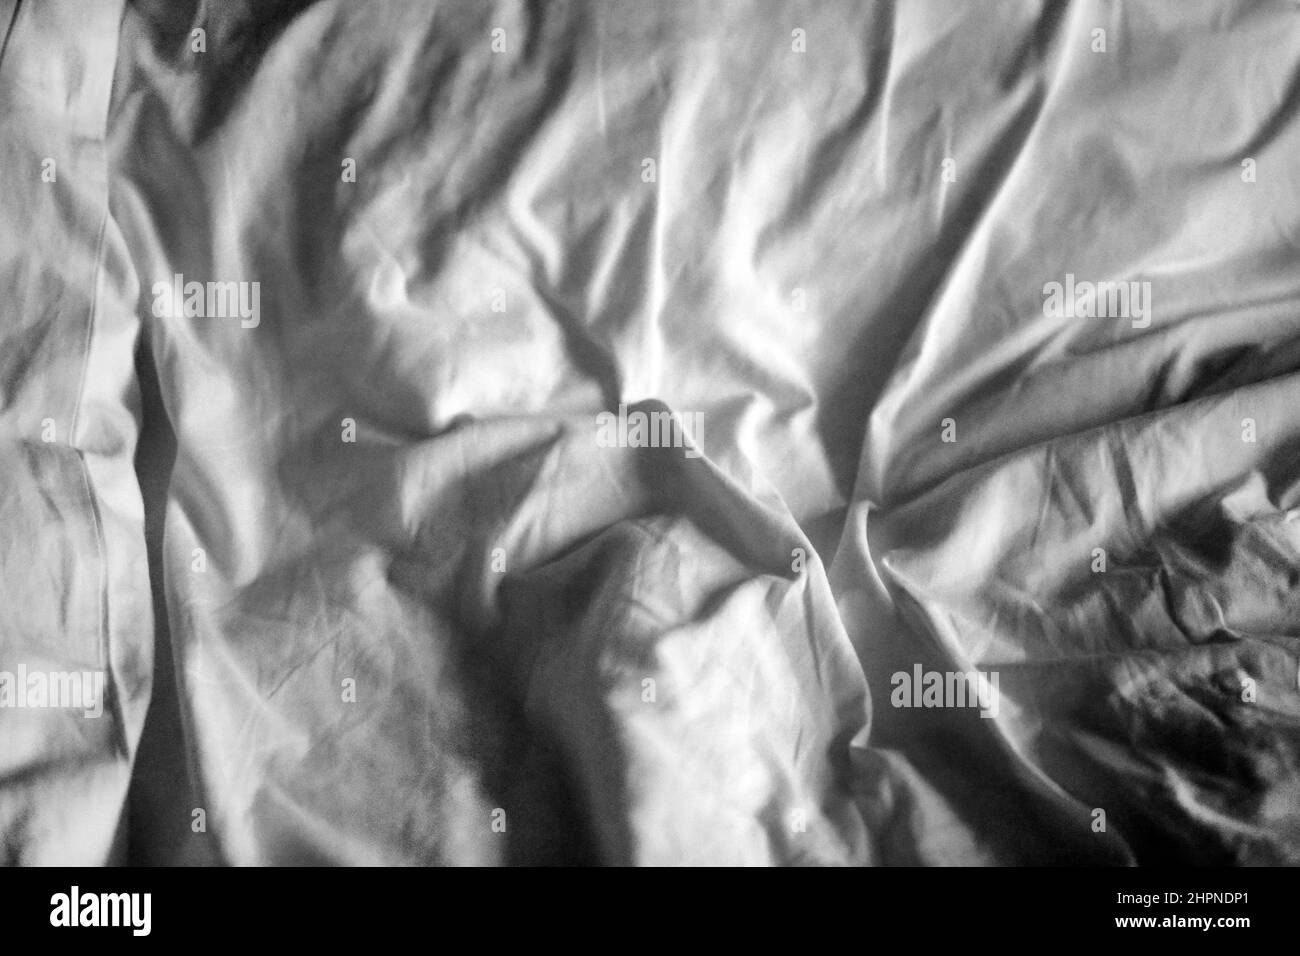 White crumpled sheet with shadows photographed close-up Stock Photo